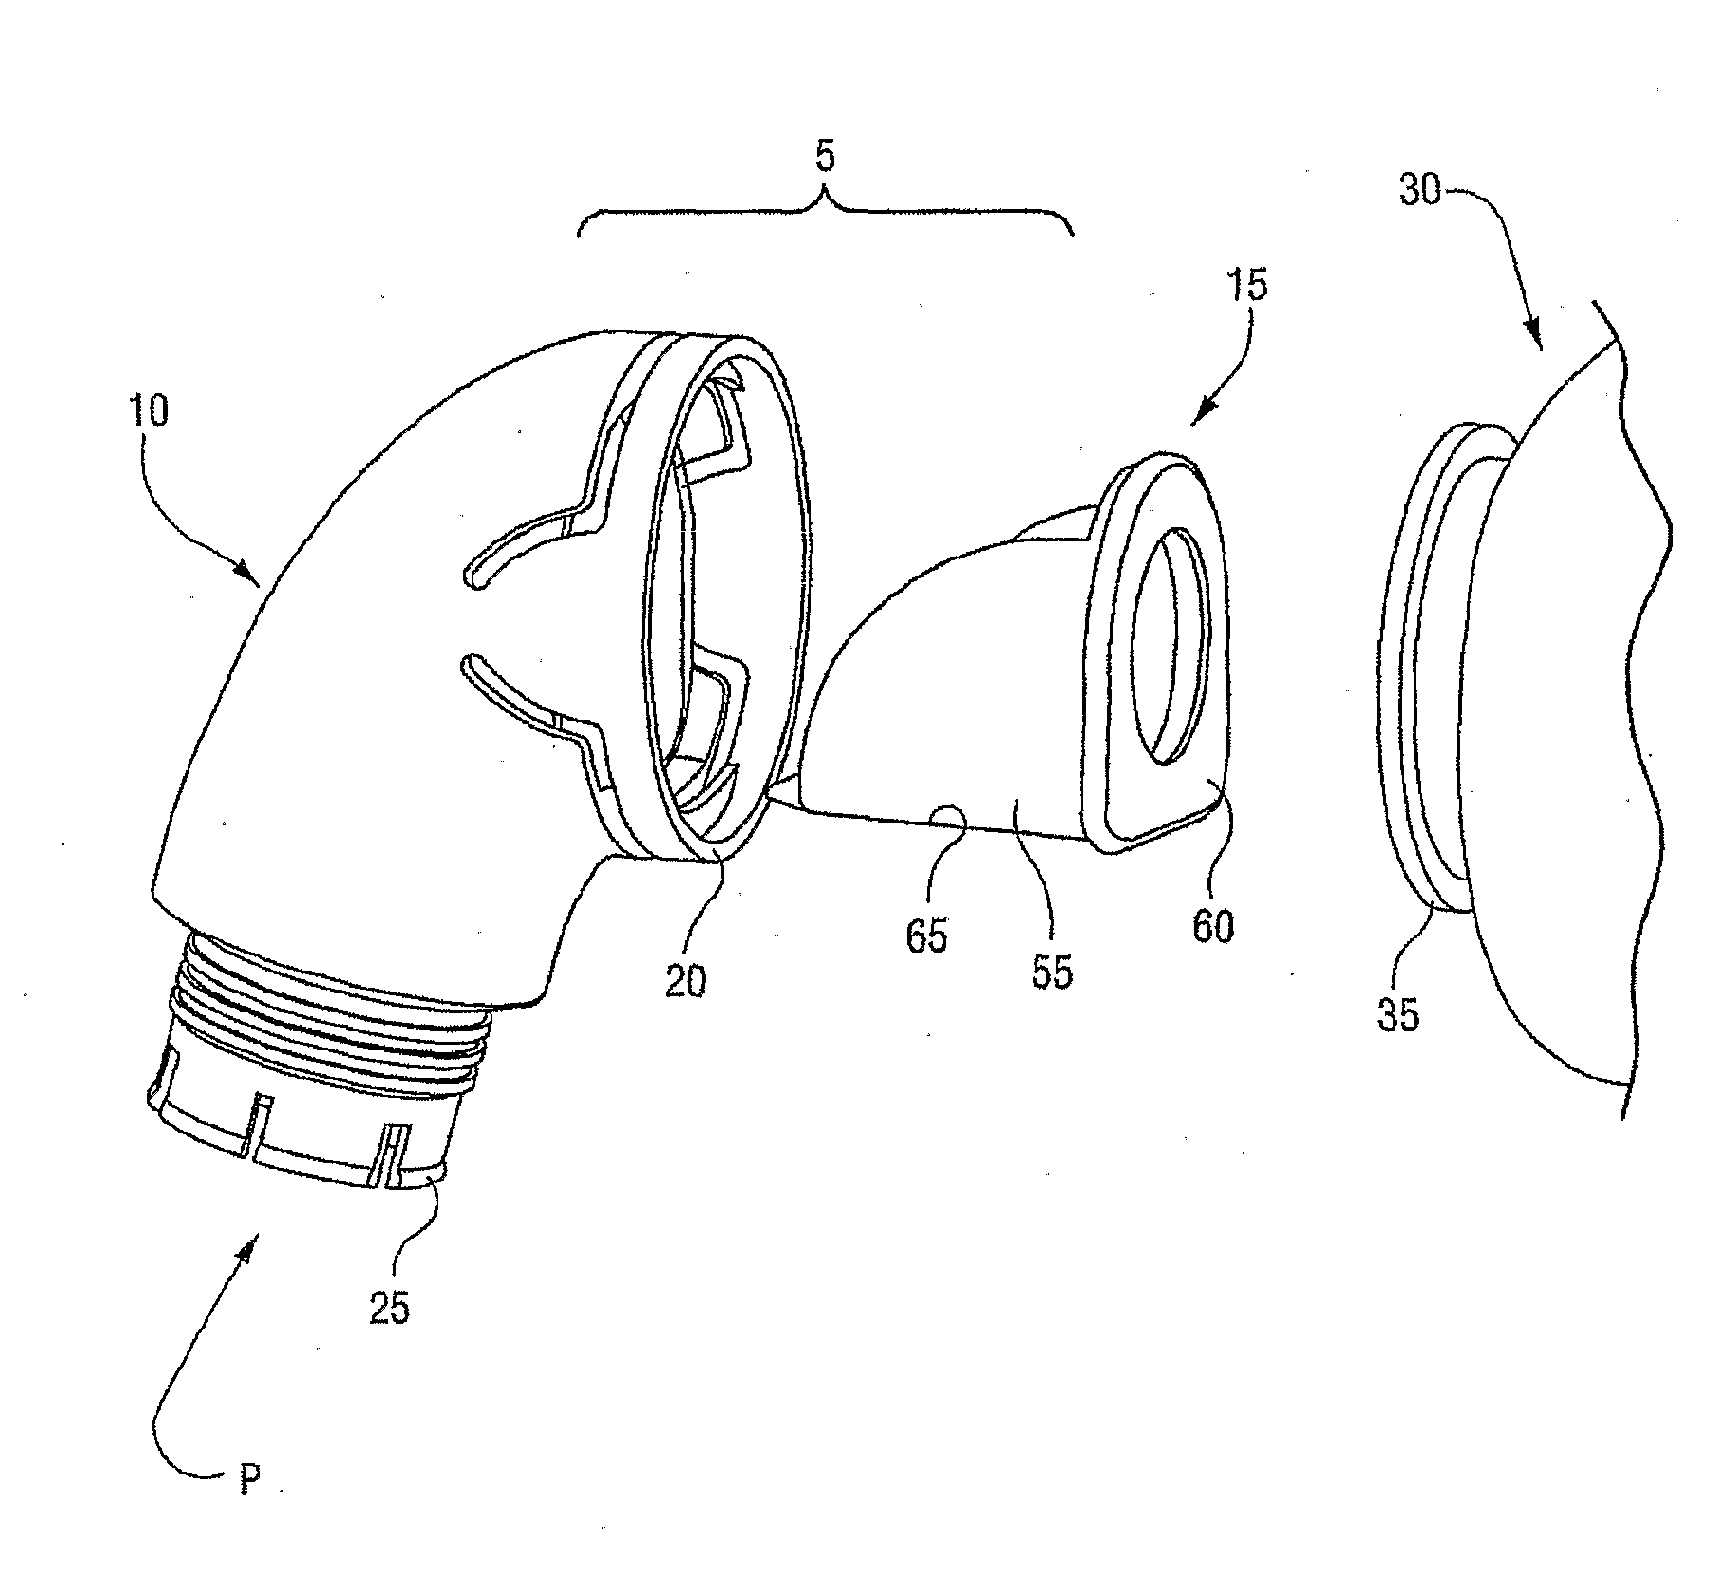 Anti-Asphyxia Valve Assembly for Respirator Mask